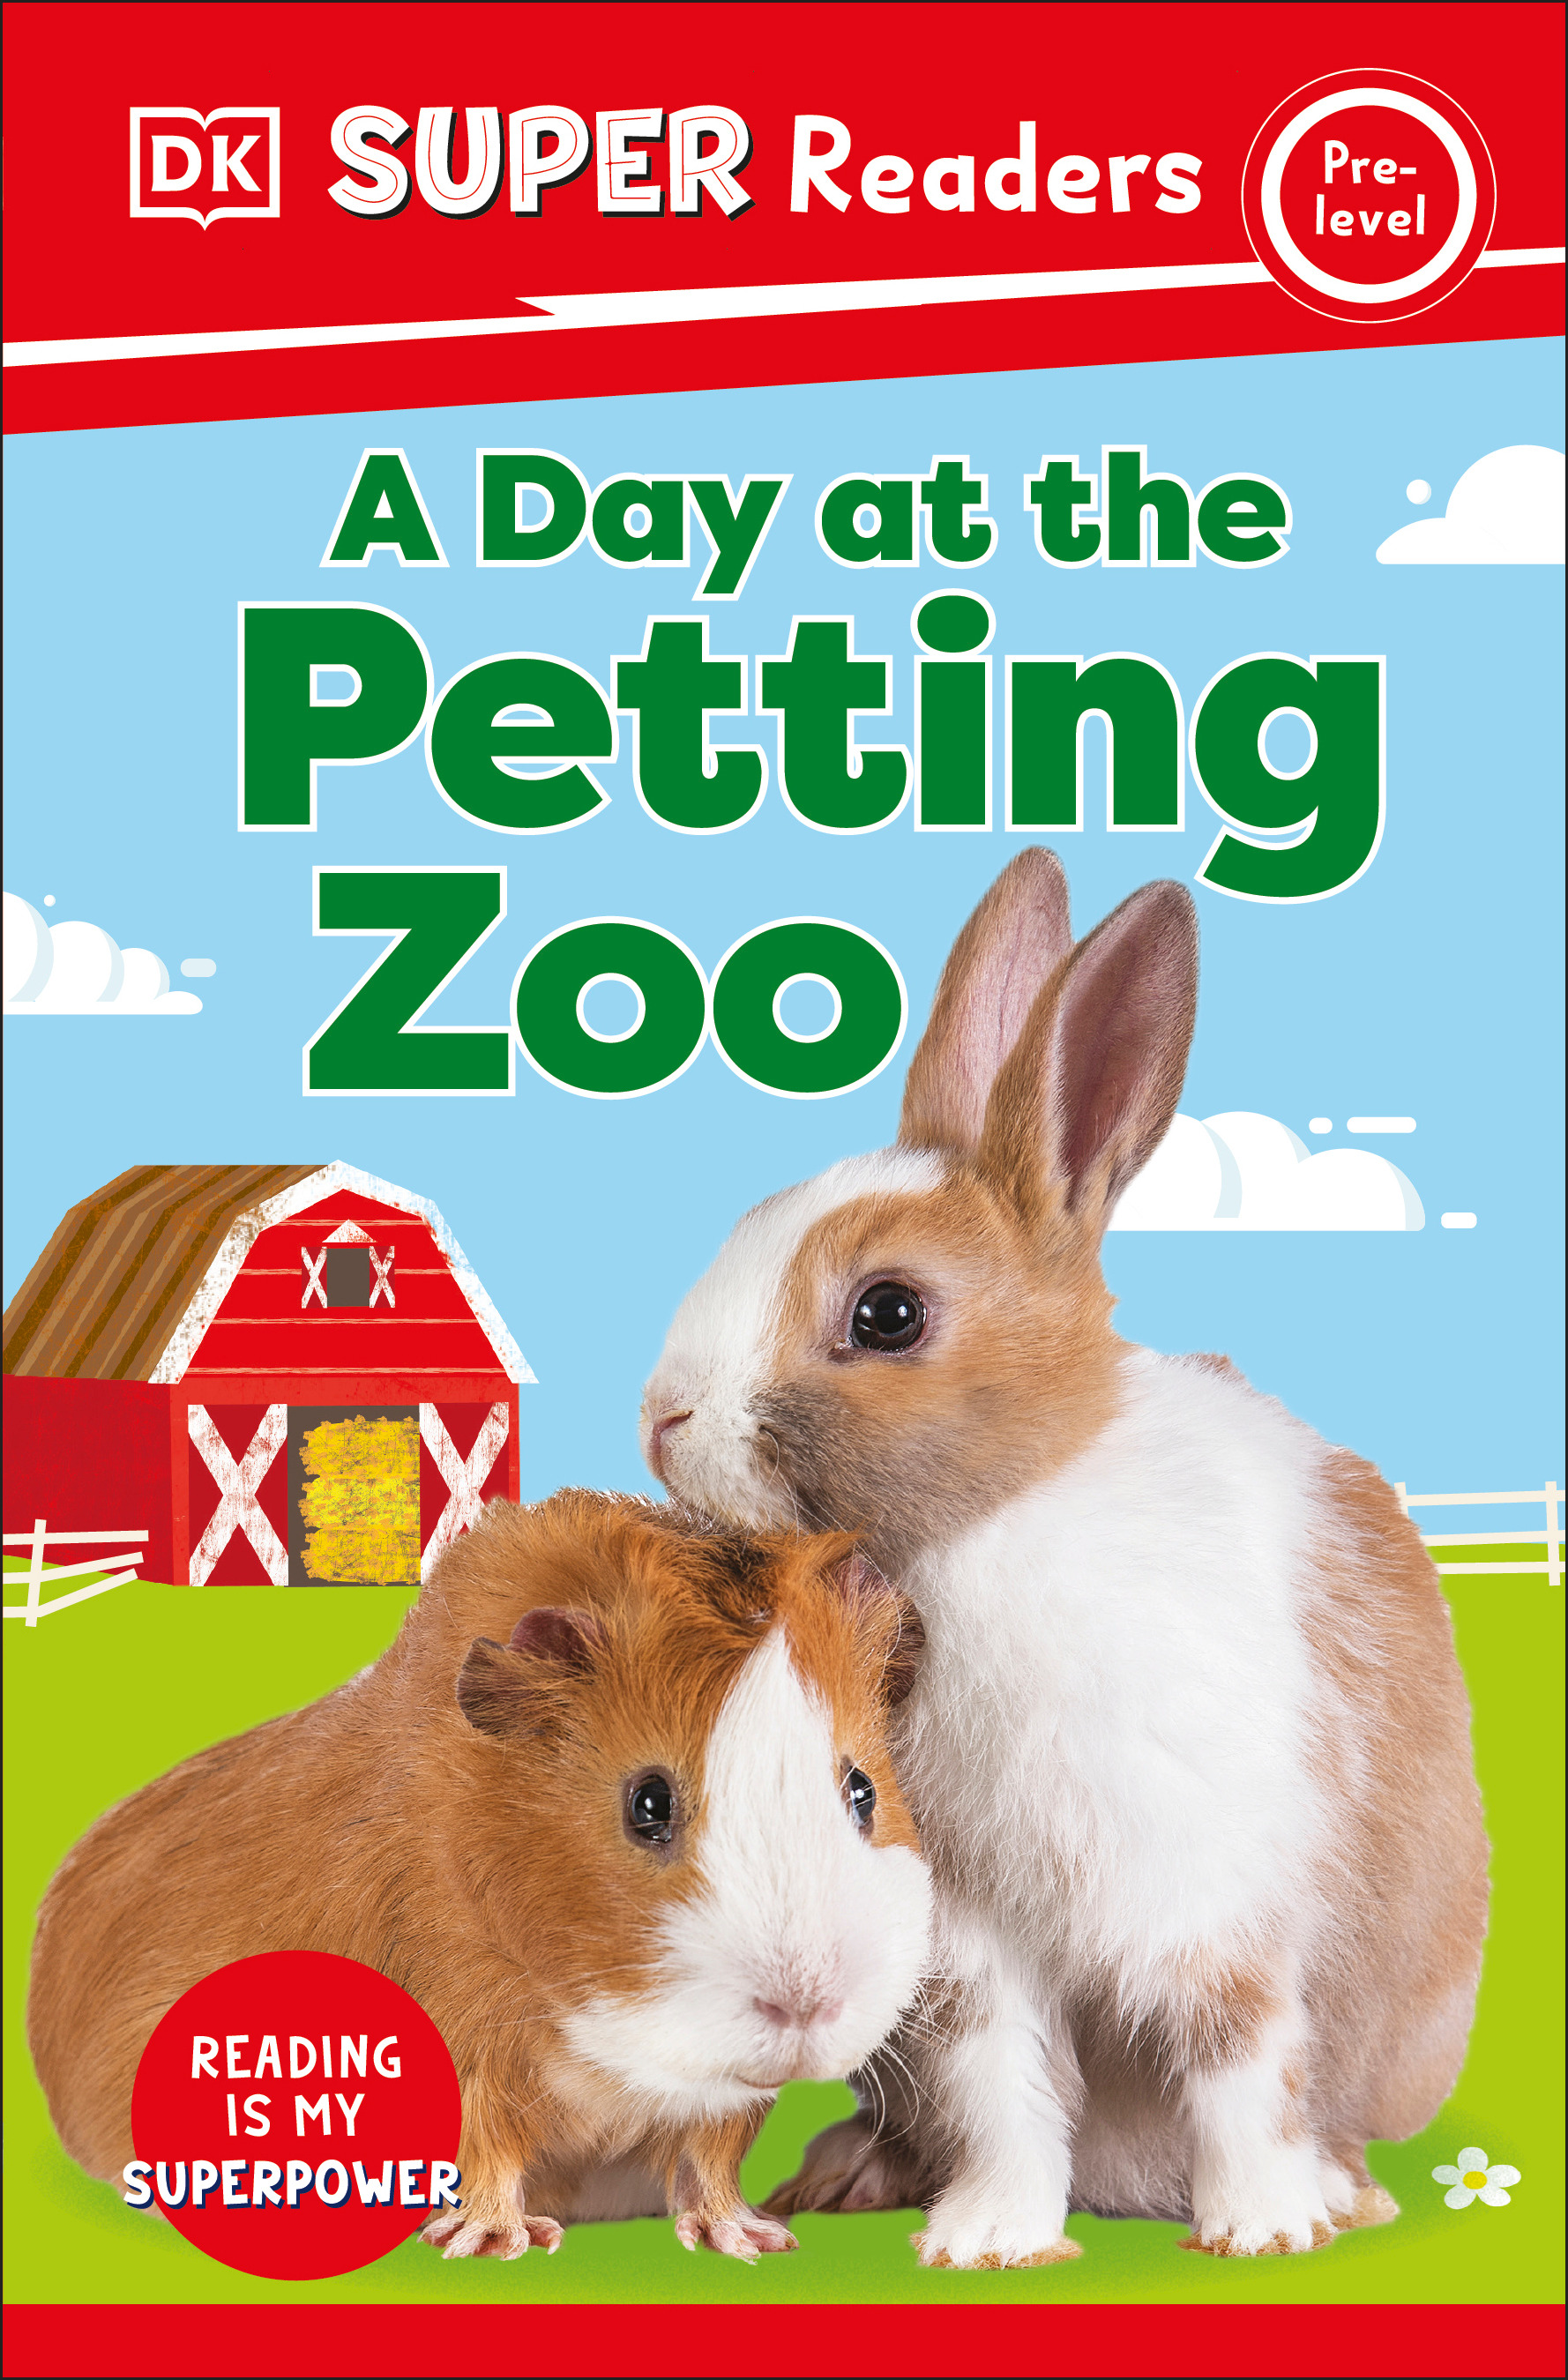 DK Super Readers Pre-Level - A Day at the Petting Zoo | 